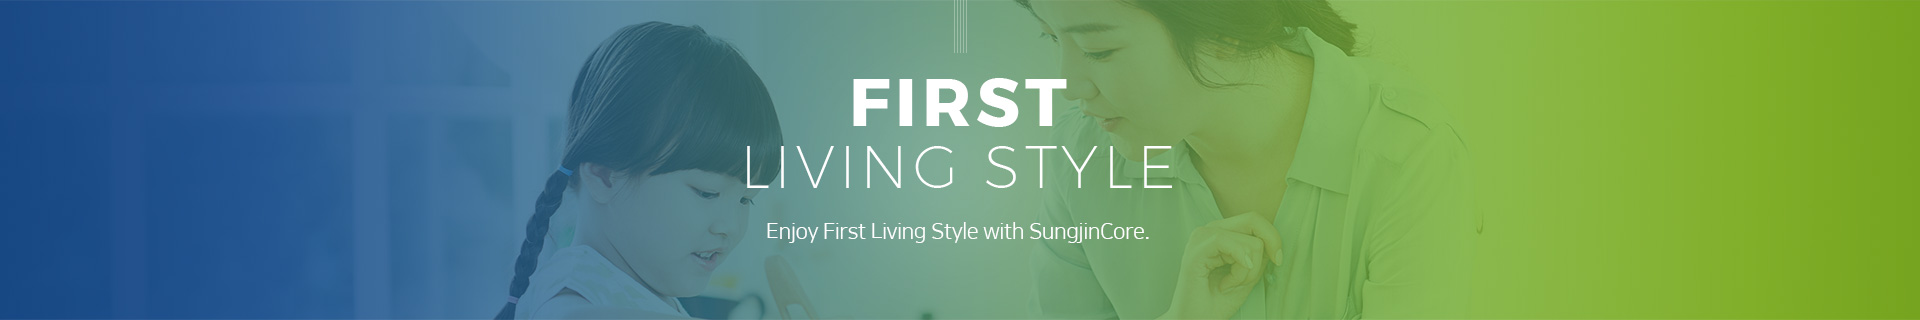  Enjoy First Living Style with SungjinCore